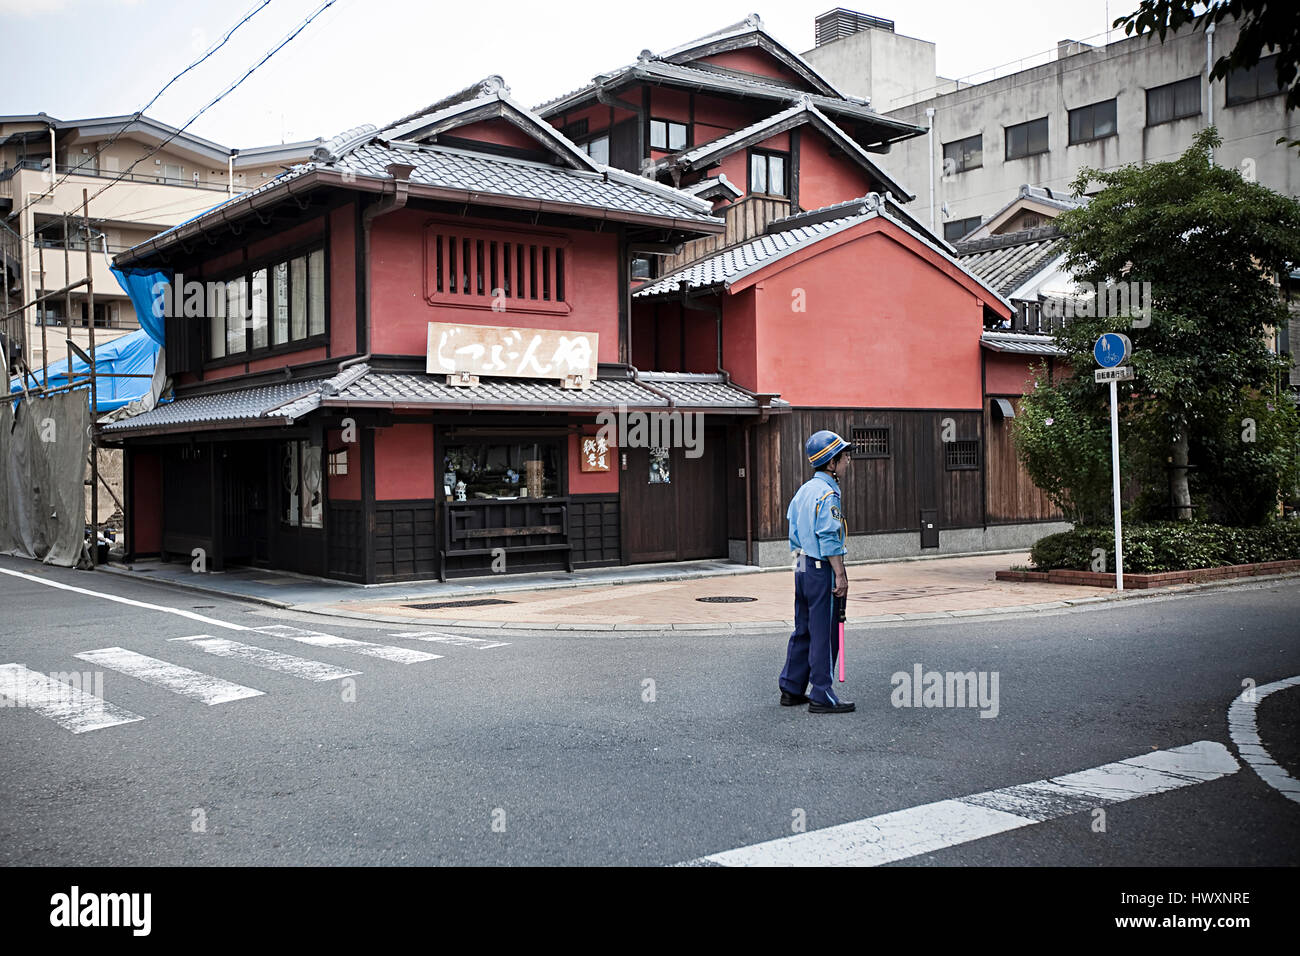 A Japanese police officer guarding the street in a neighborhood, Japan. Stock Photo